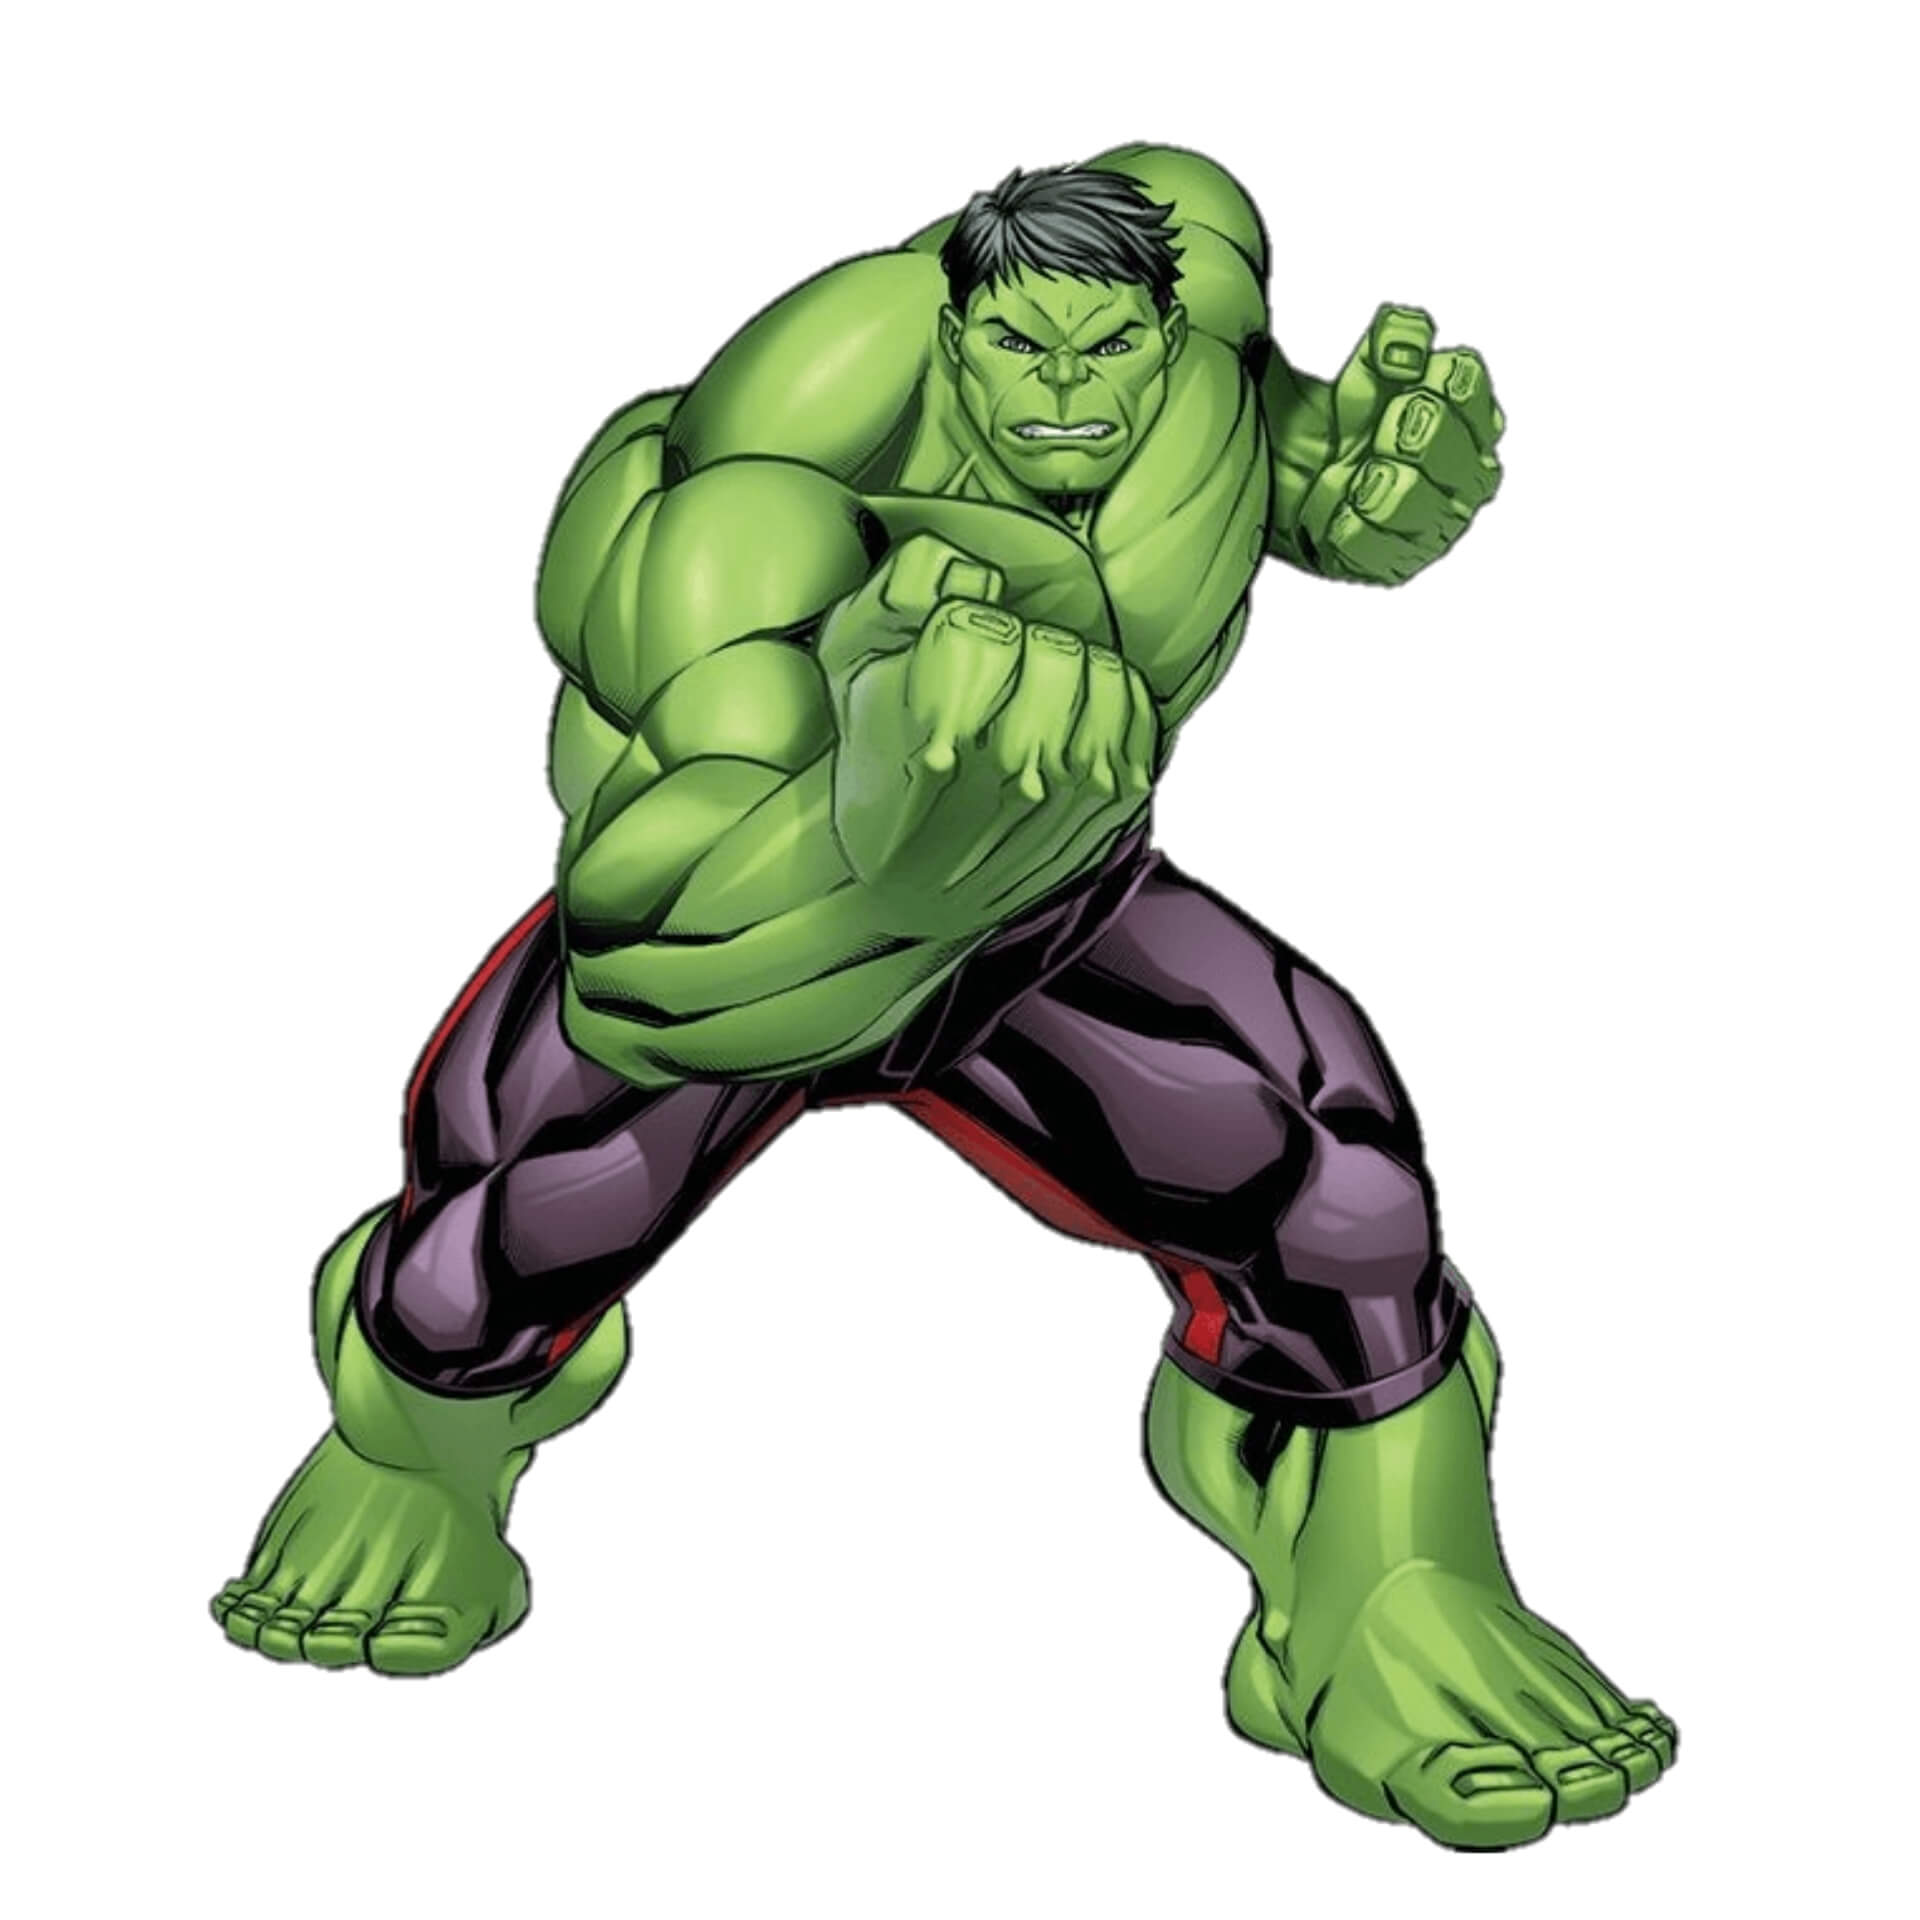 Hulk PNG Images Free Download with Transparent Background